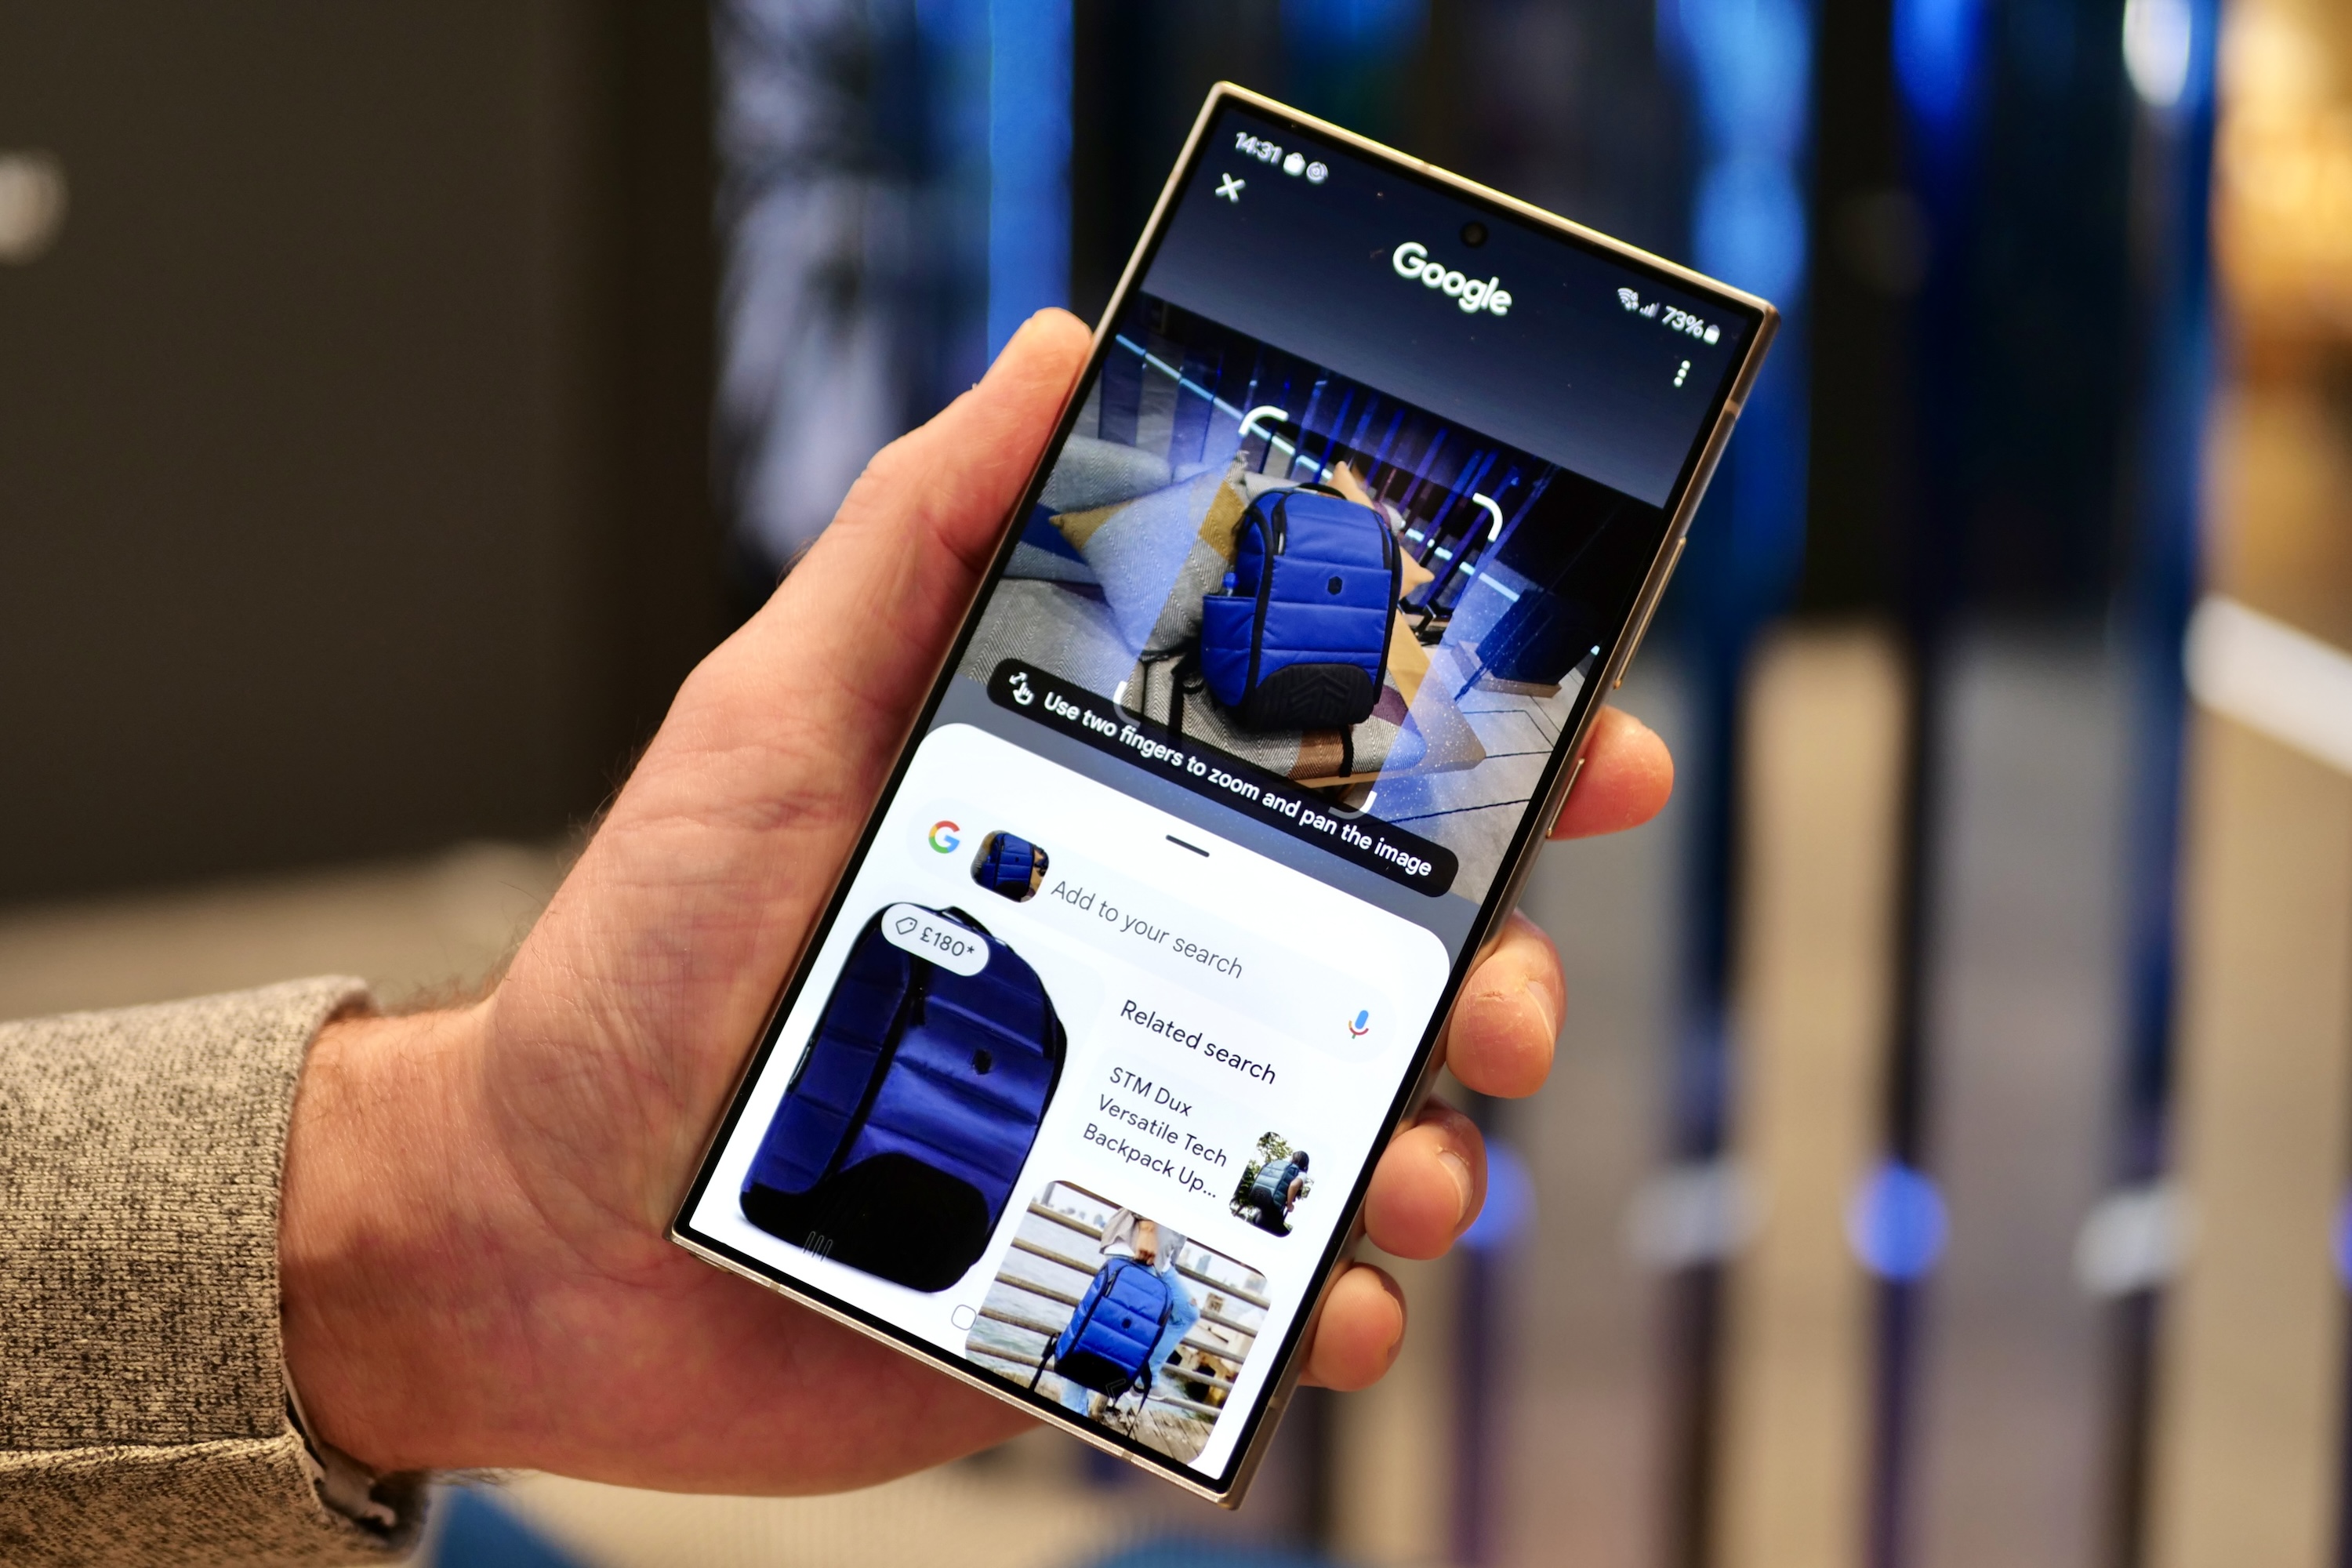 Galaxy AI is now available for other Samsung phones